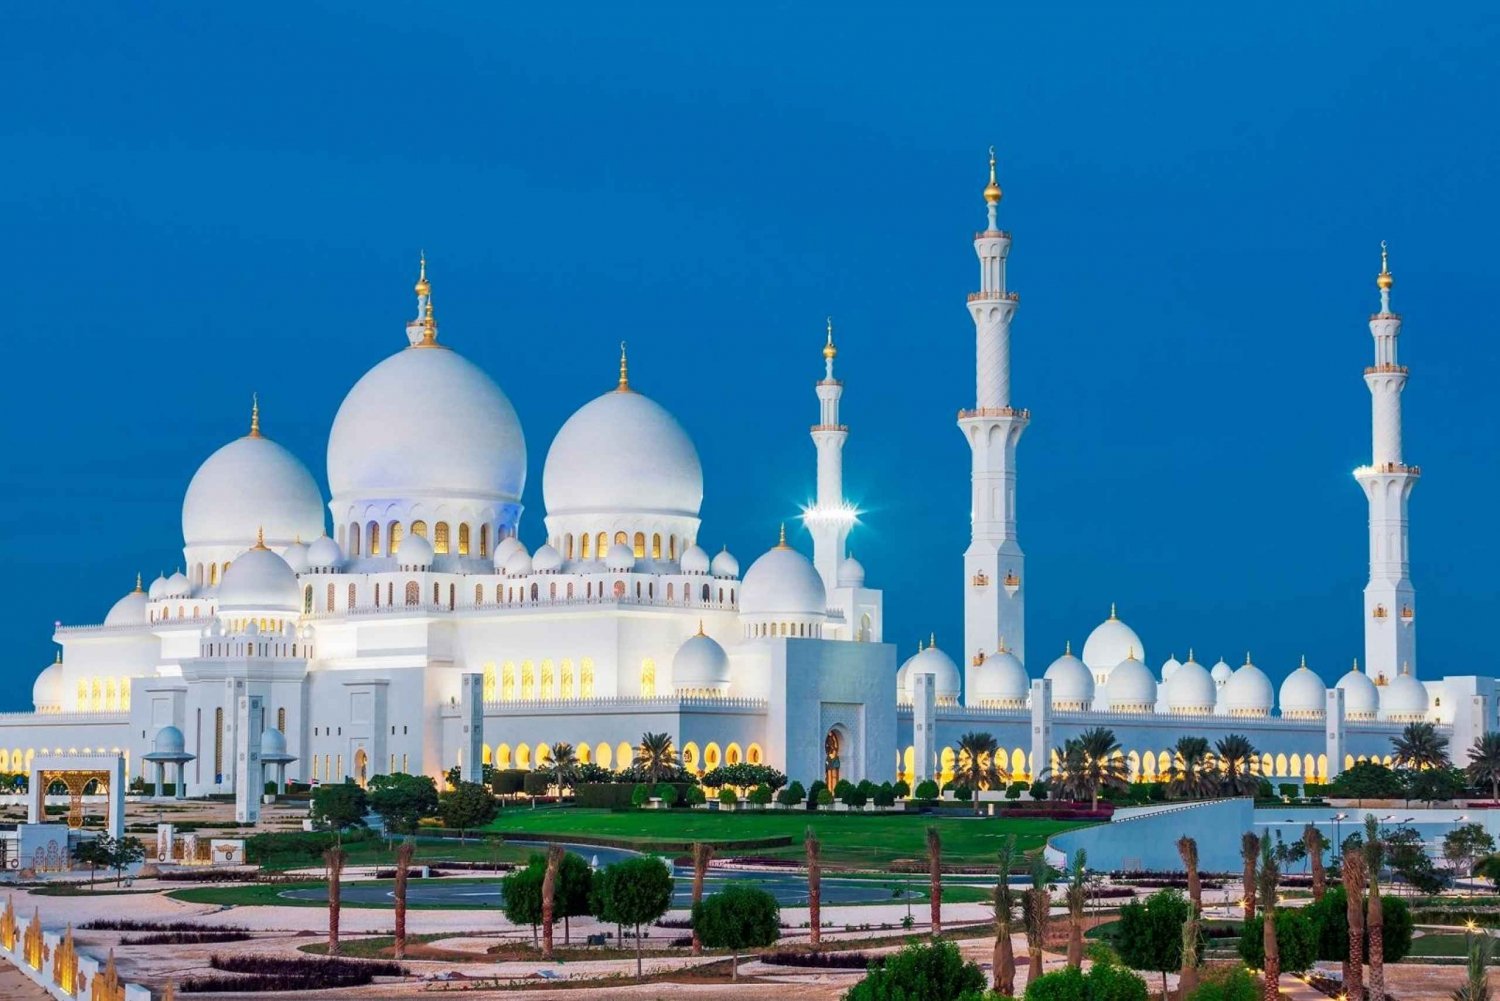 Abu Dhabi: Full Day Live Guide Discovery Tour